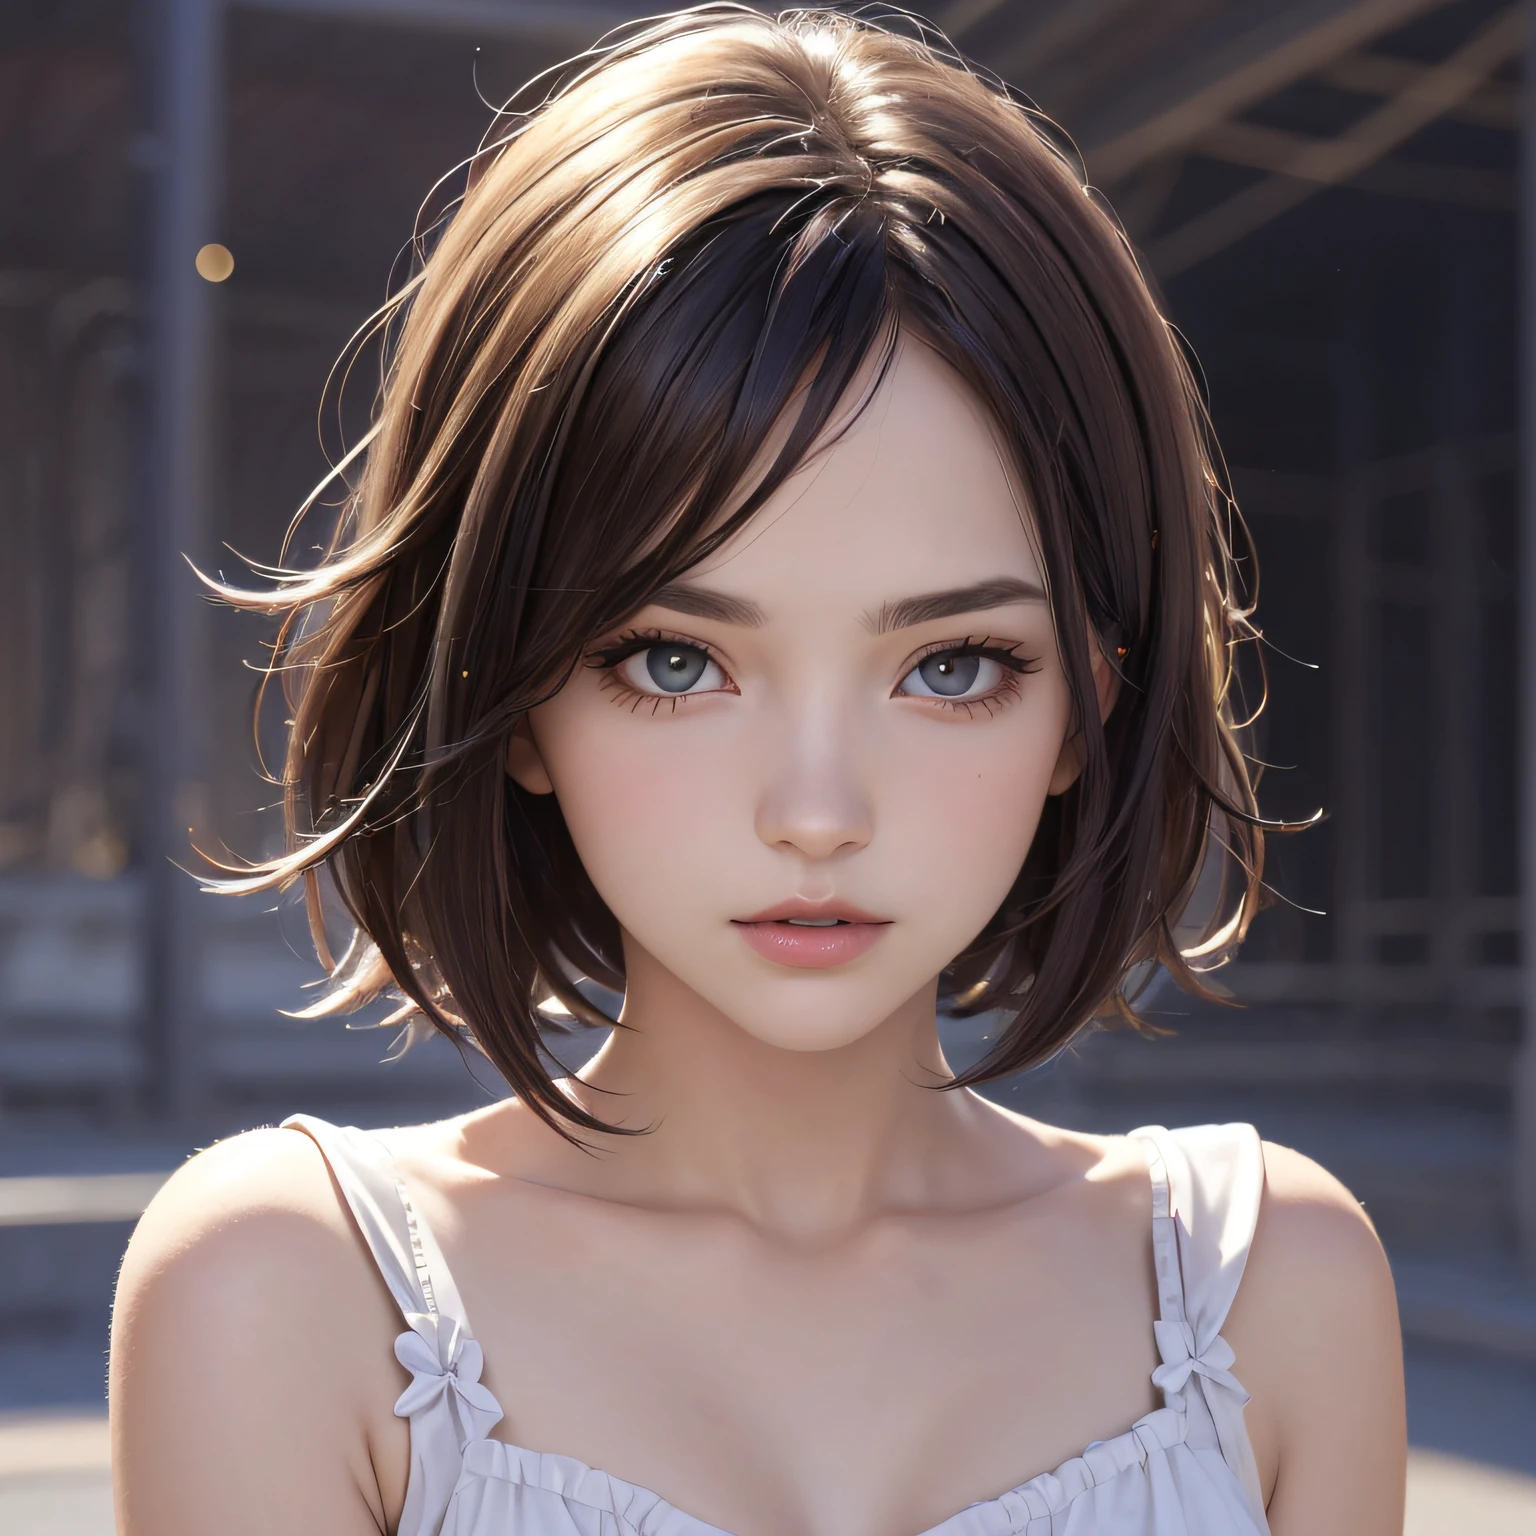 A woman with a short brown hair and a white top - SeaArt AI